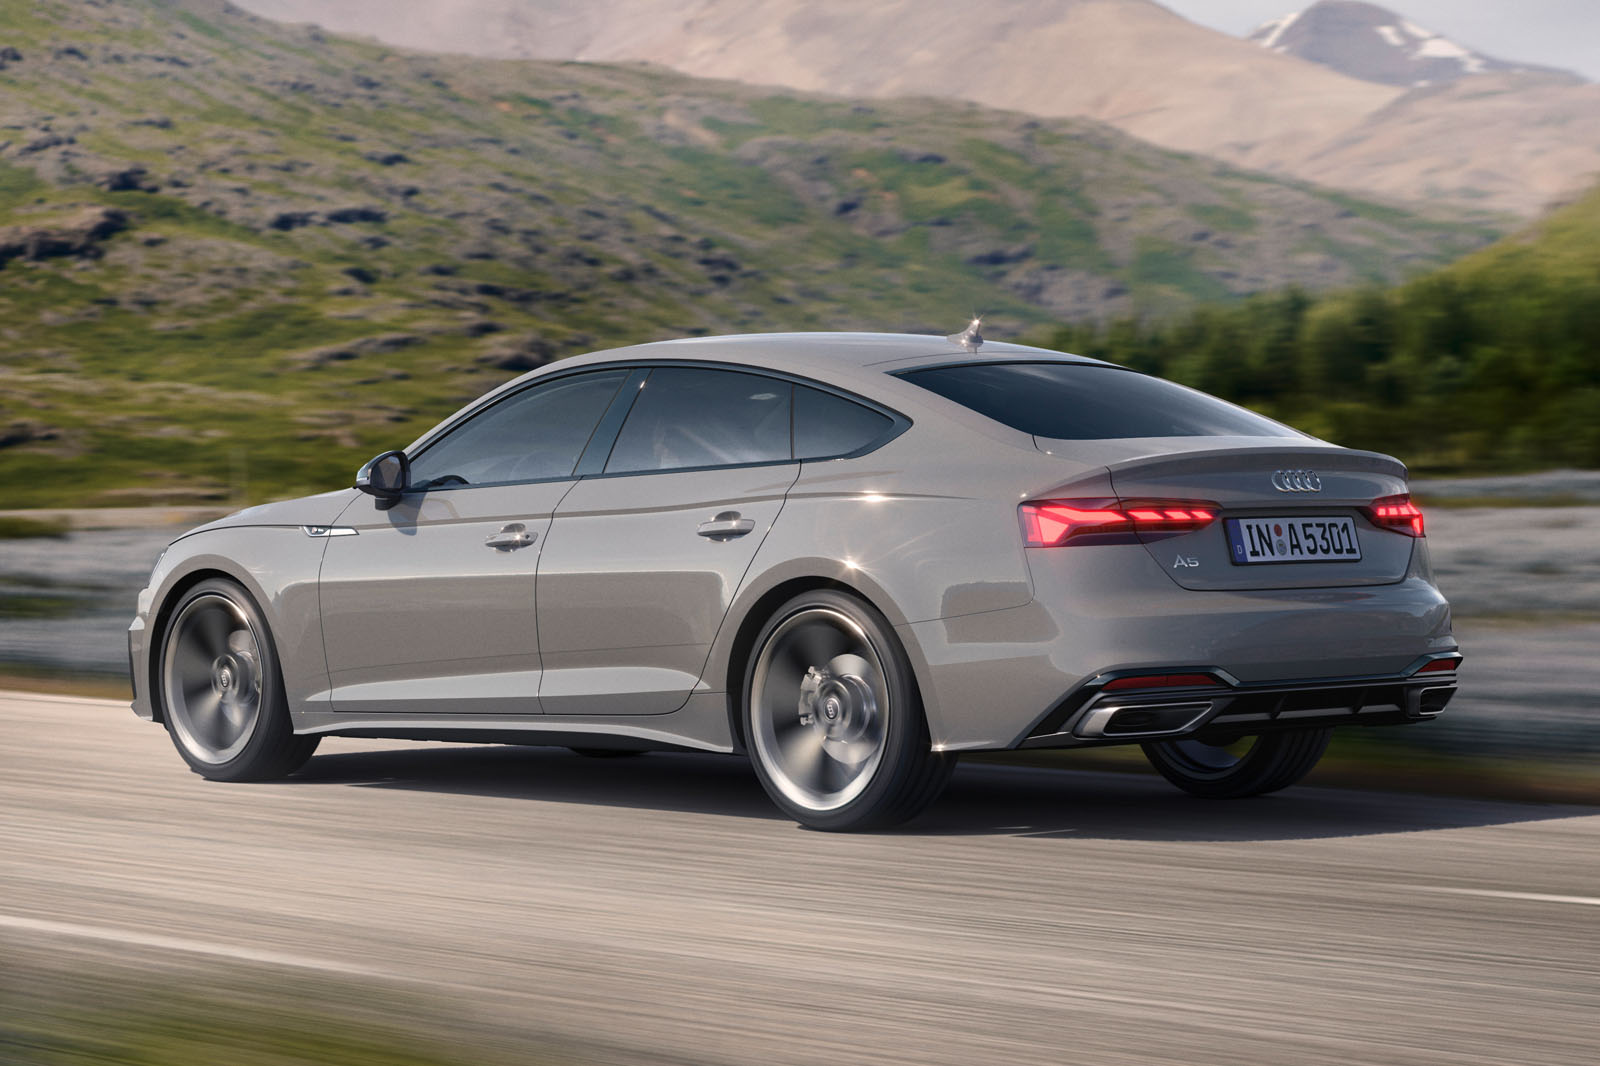 Inwoner hoofdstad paradijs Audi A5 revamped with new styling, mild hybrid powertrains | Autocar